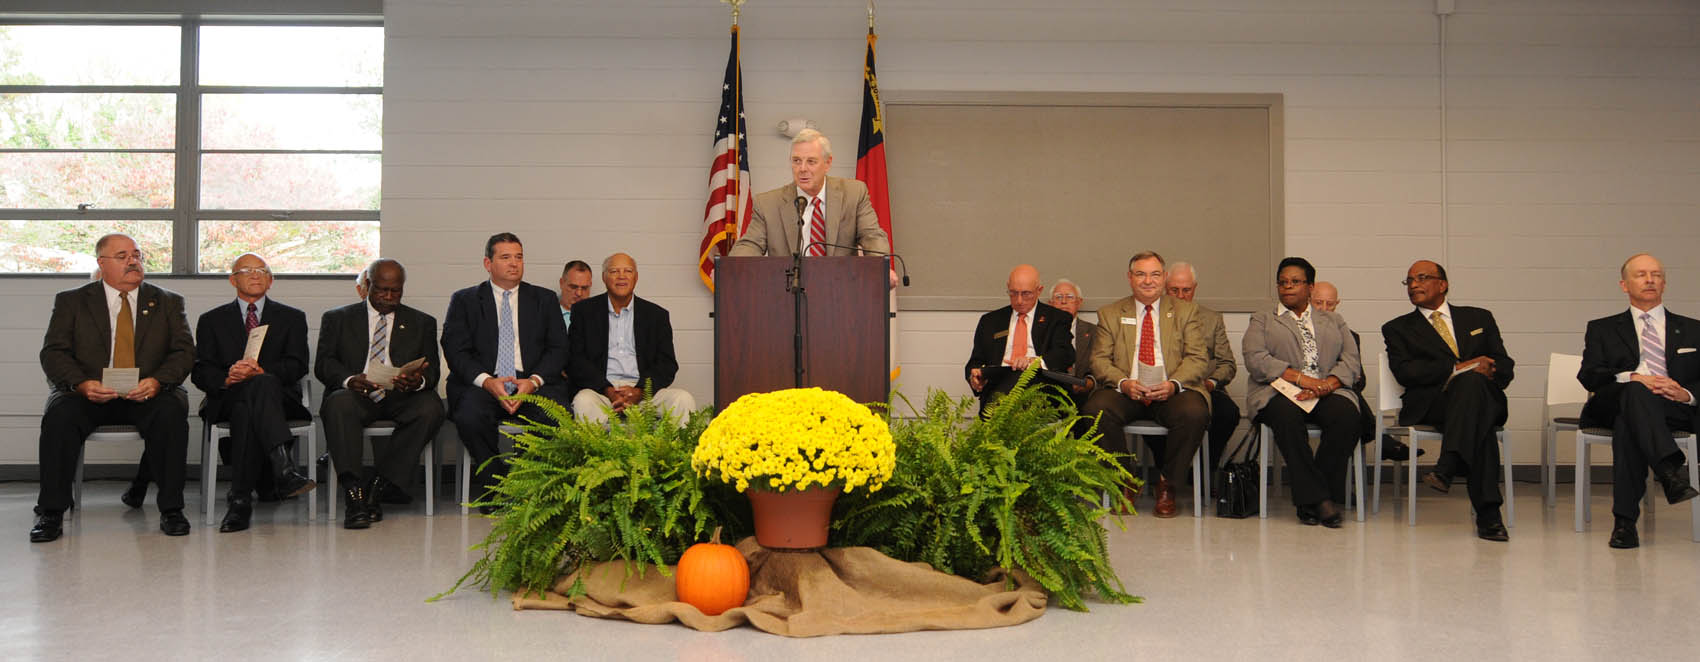 Click to enlarge,  Dunn Center ceremony, image 1 